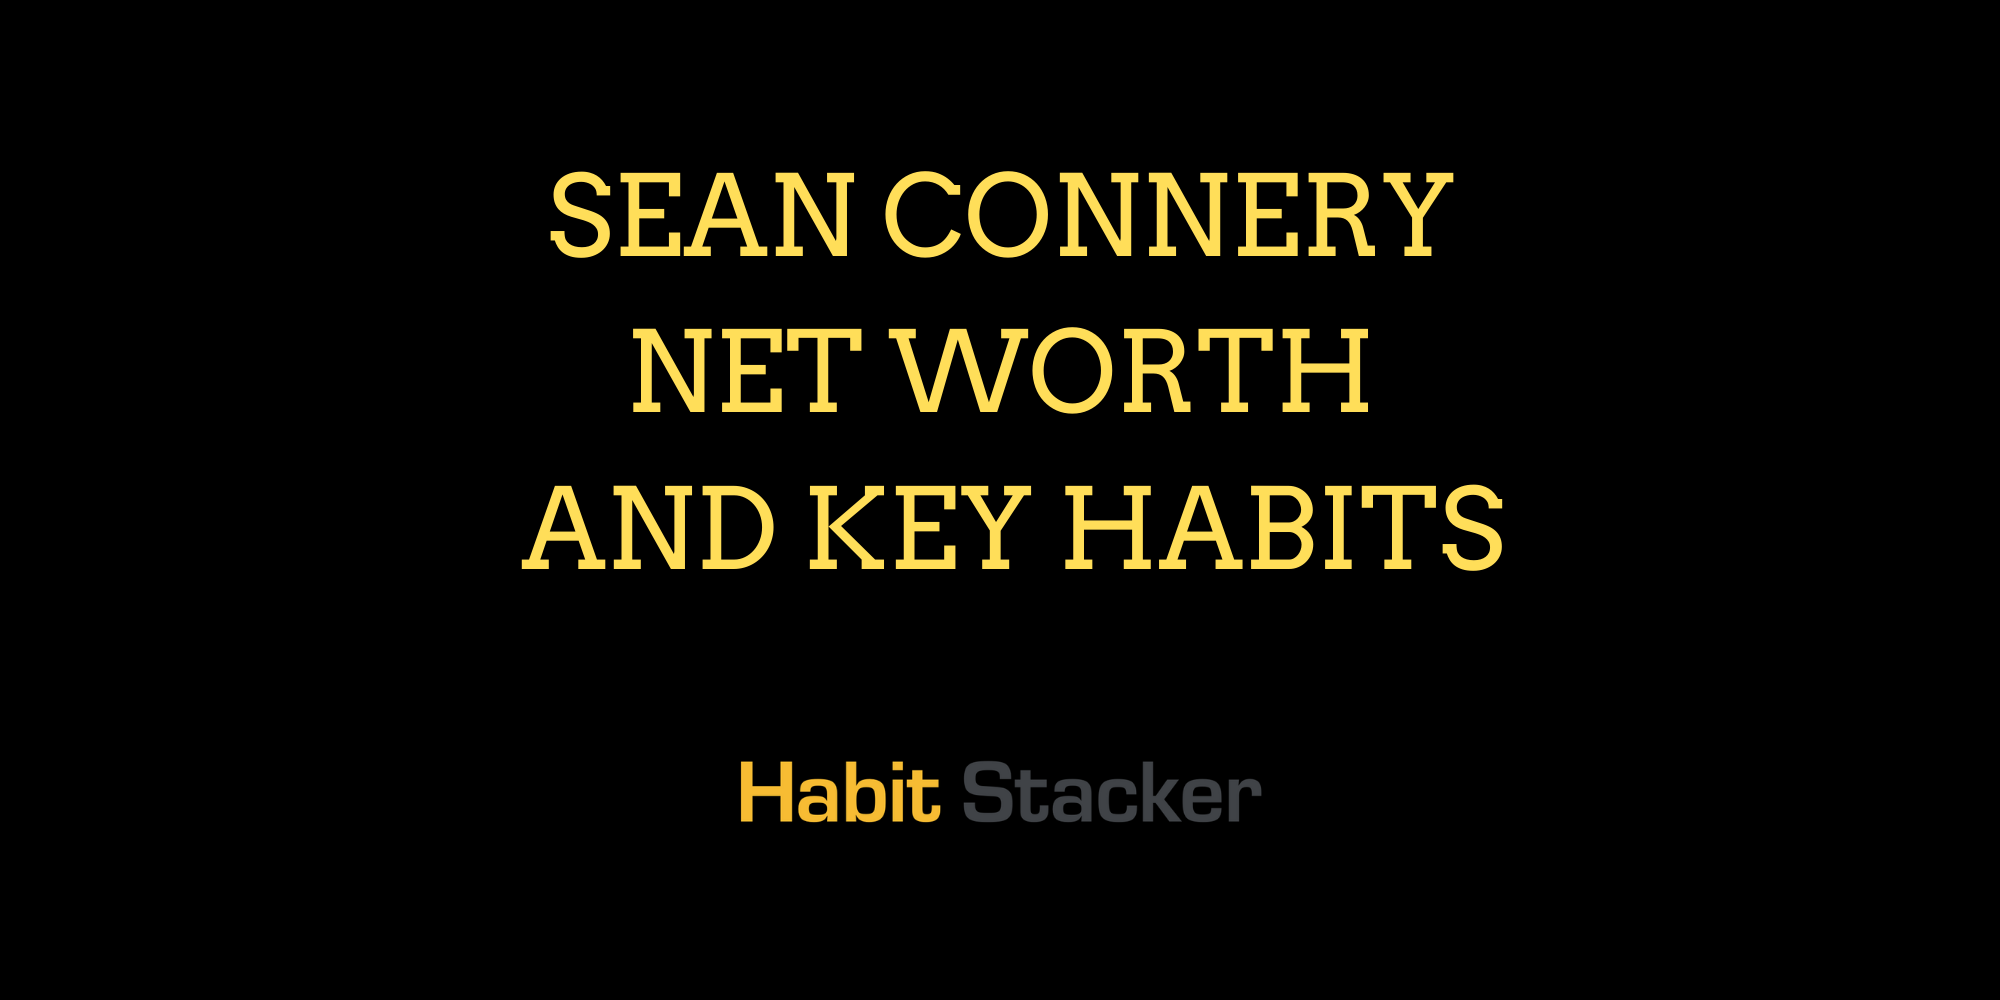 Sean Connery Net Worth and Key Habits